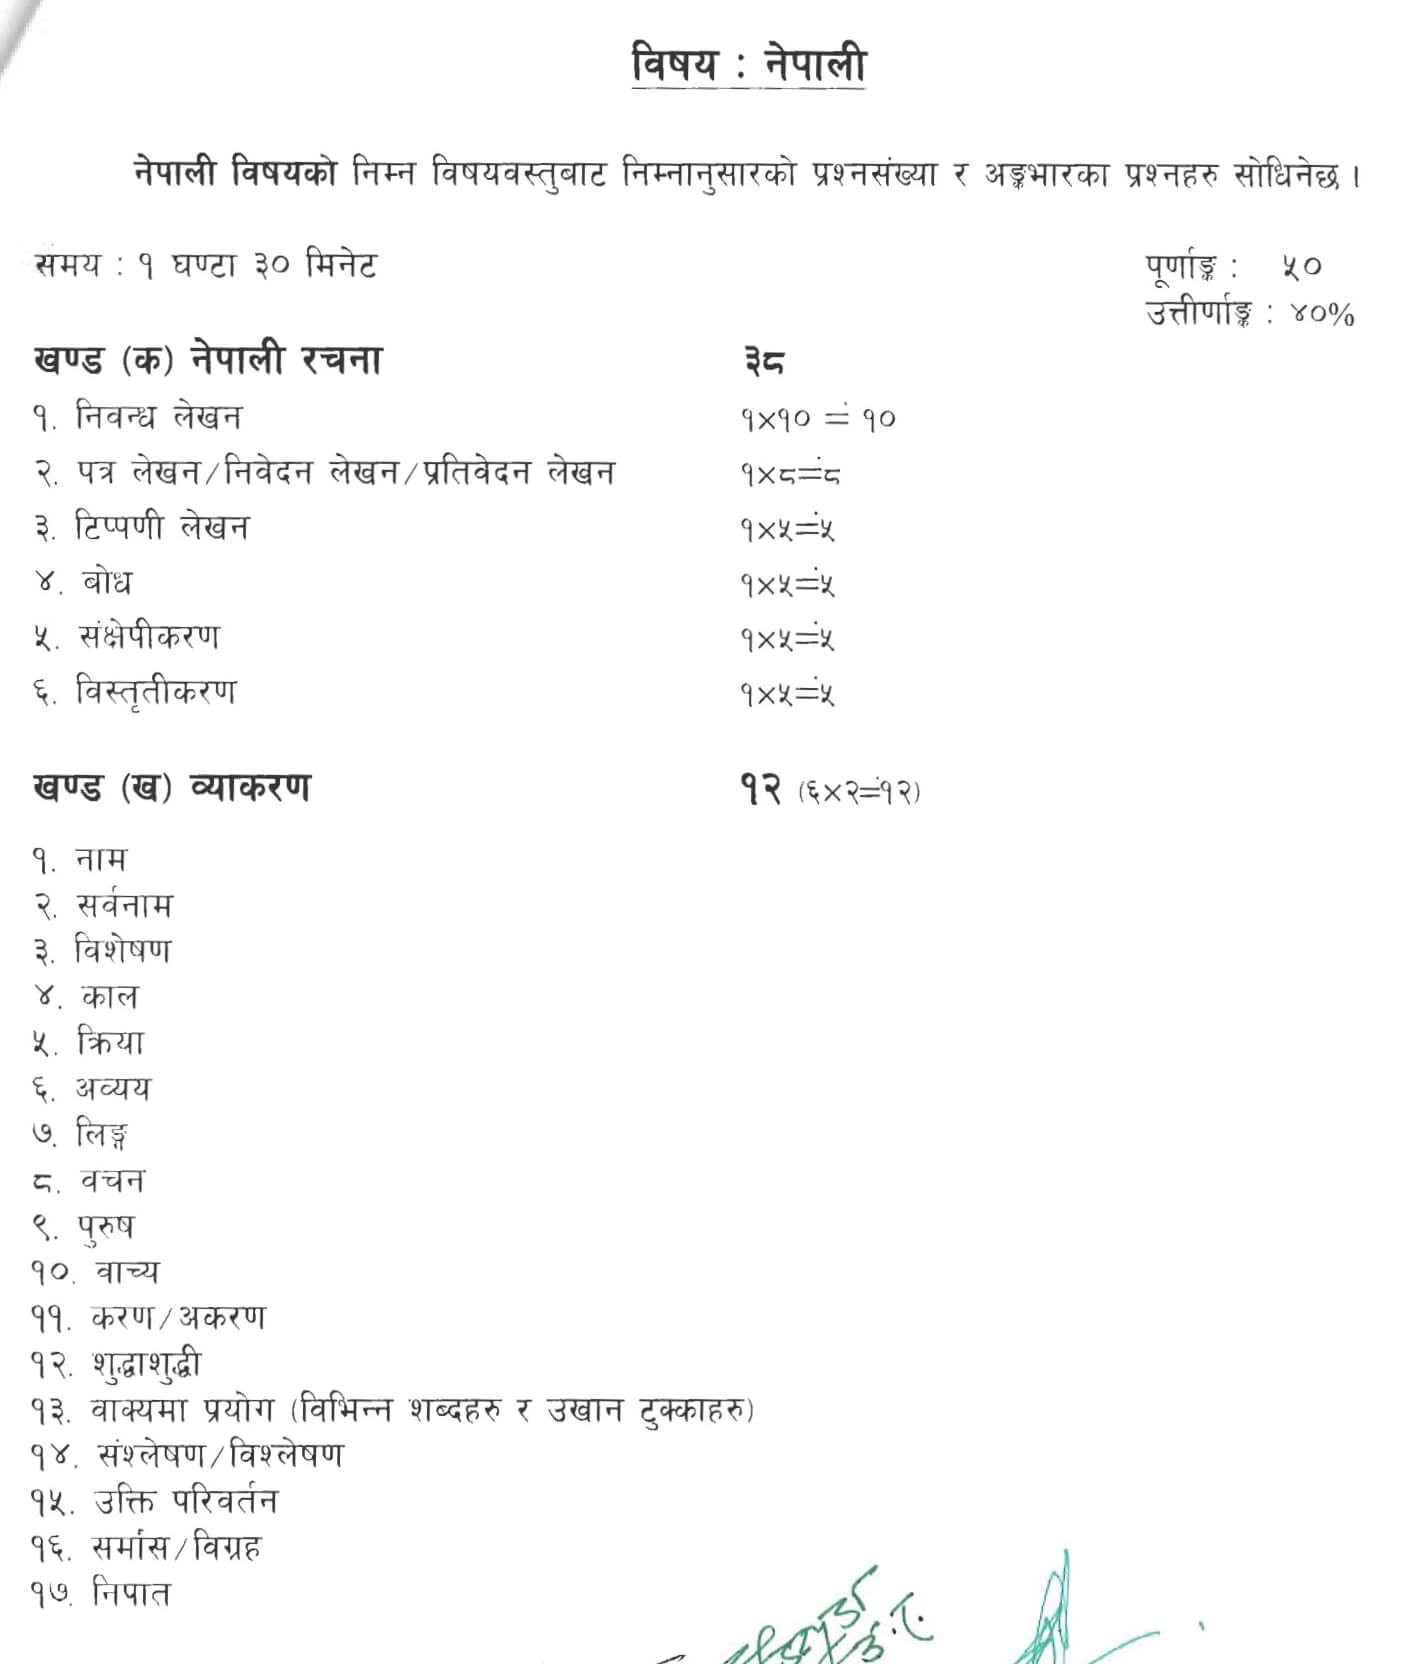 APF Inspector Syllabus PDF. Armed Police Force Inspector Syllabus. Sasastra Prahari Inspector Law Syllabus. APF Nepal Syllabus PDF APF GOV NP Syllabus